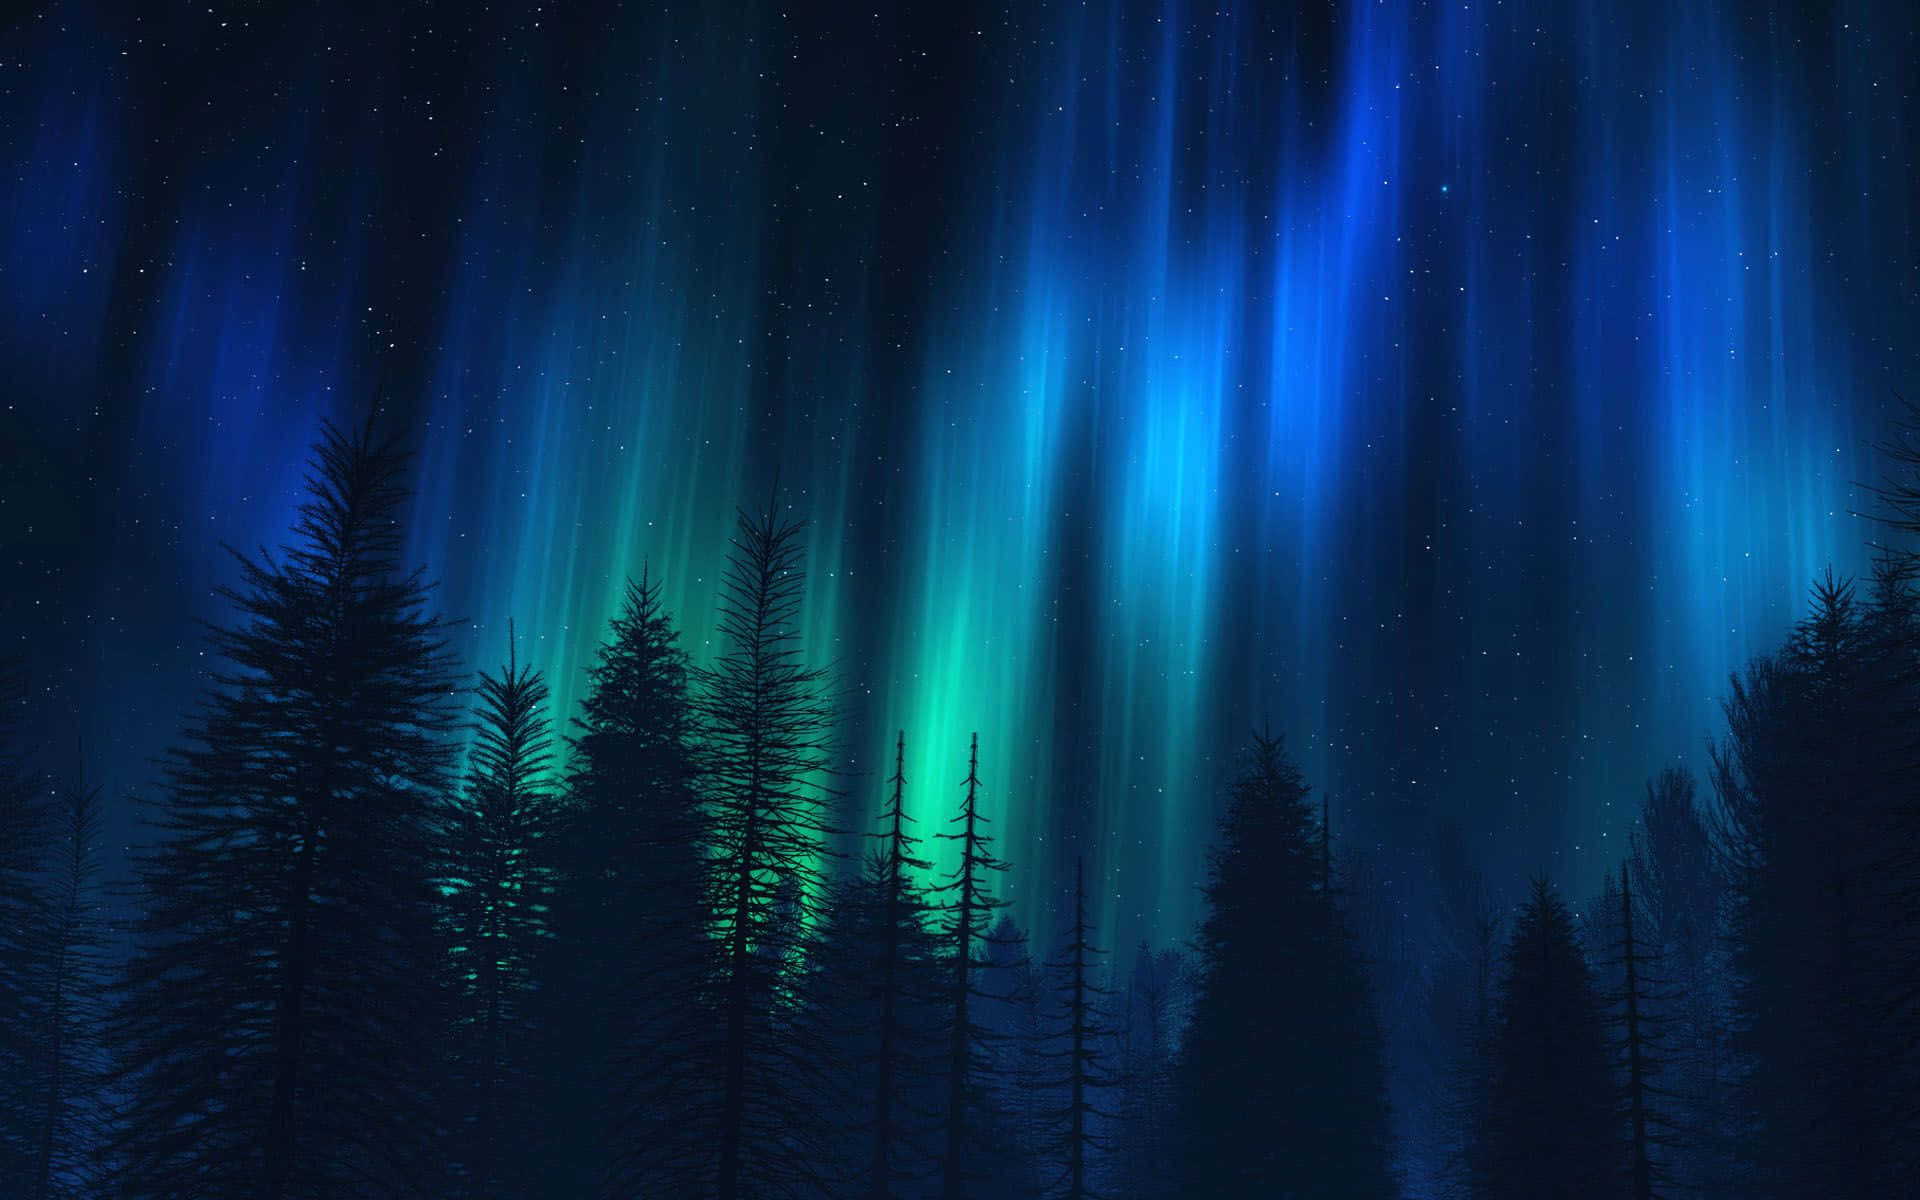 Darkness illuminated by the vibrant, glowing colors of the Northern Lights.